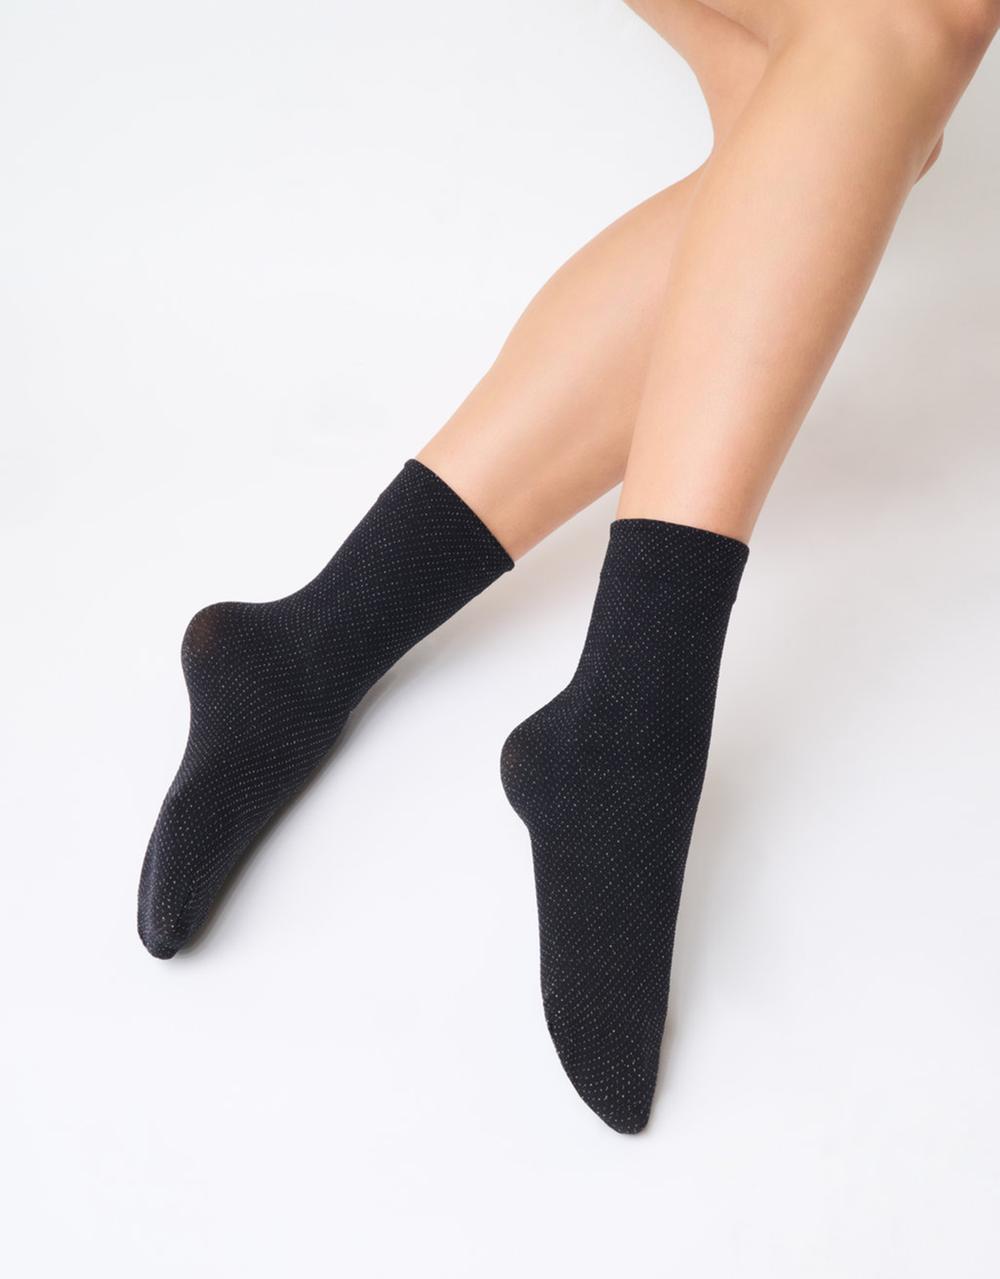 SiSi 1742 Bee Calzino - Black opaque crew length ankle socks with a sparkly silver dotted pattern and soft elasticated cuff.